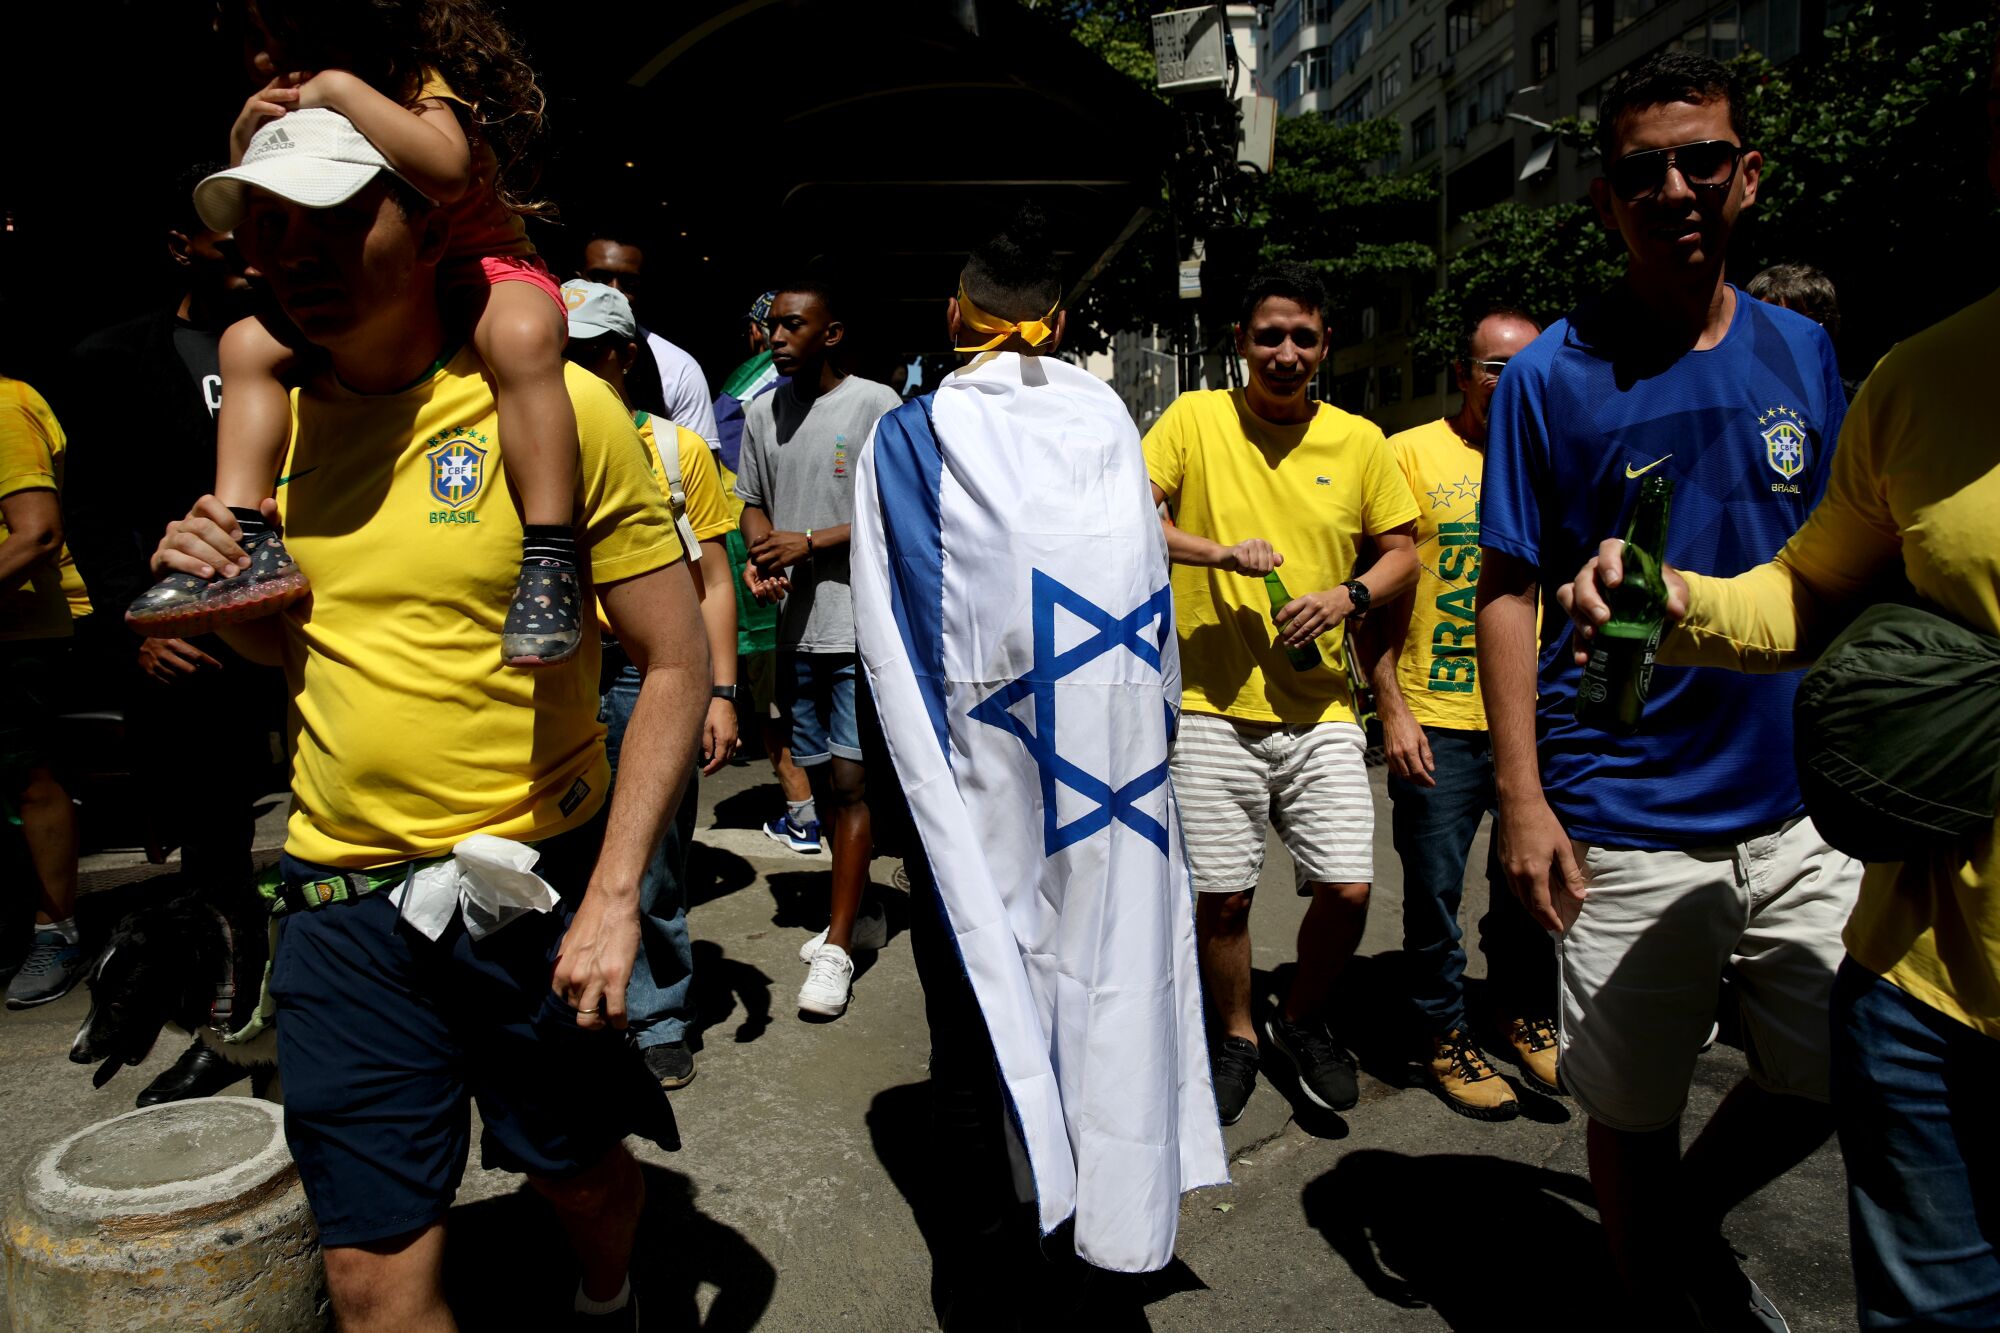 A man wears the flag of Israel at a rally.